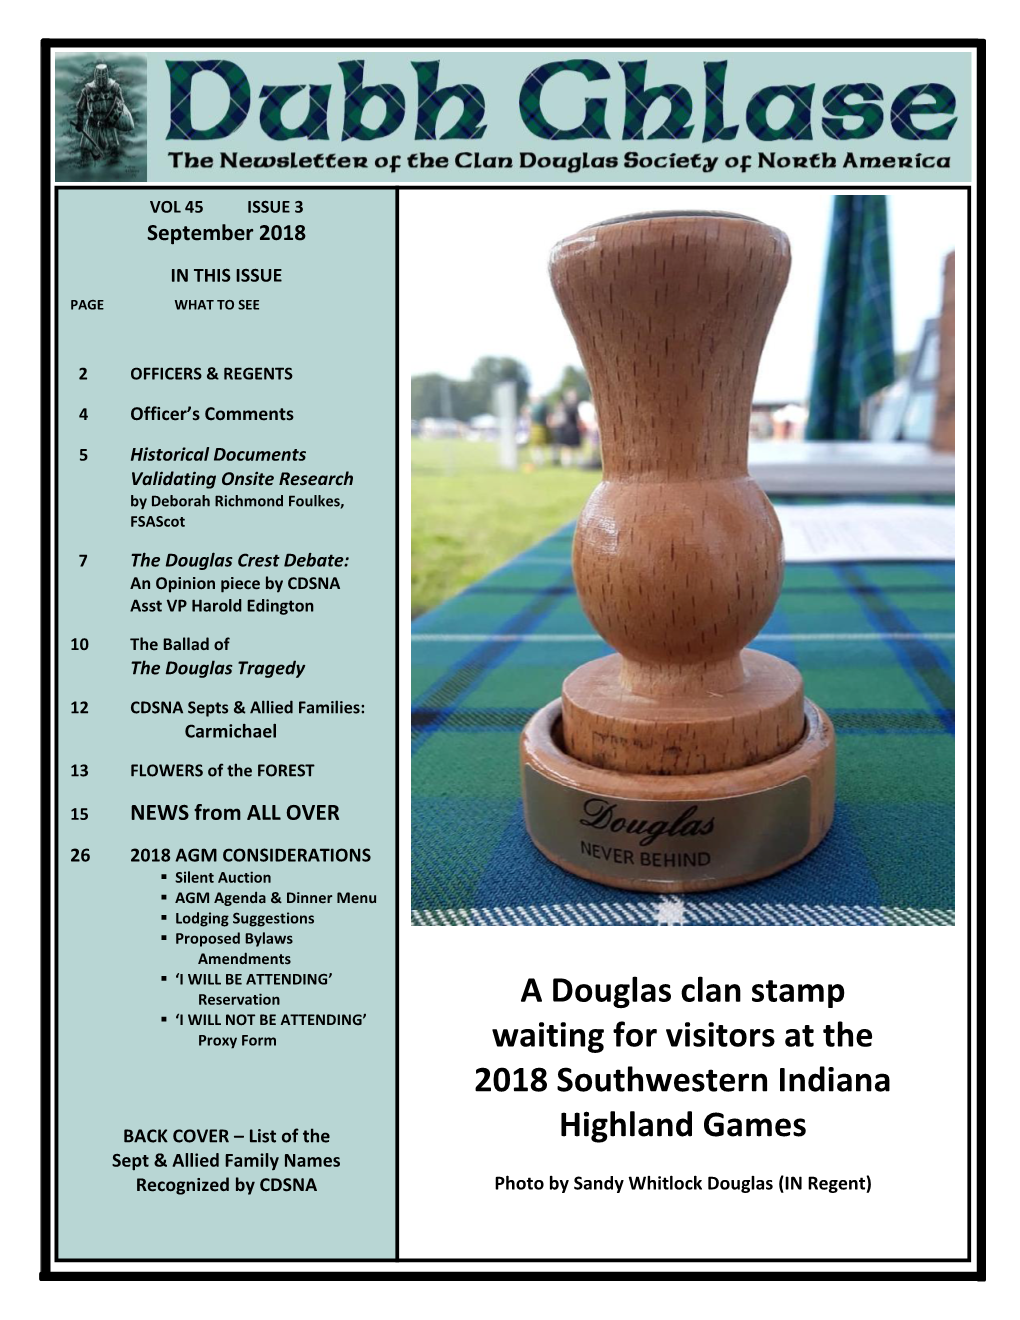 A Douglas Clan Stamp Waiting for Visitors at the 2018 Southwestern